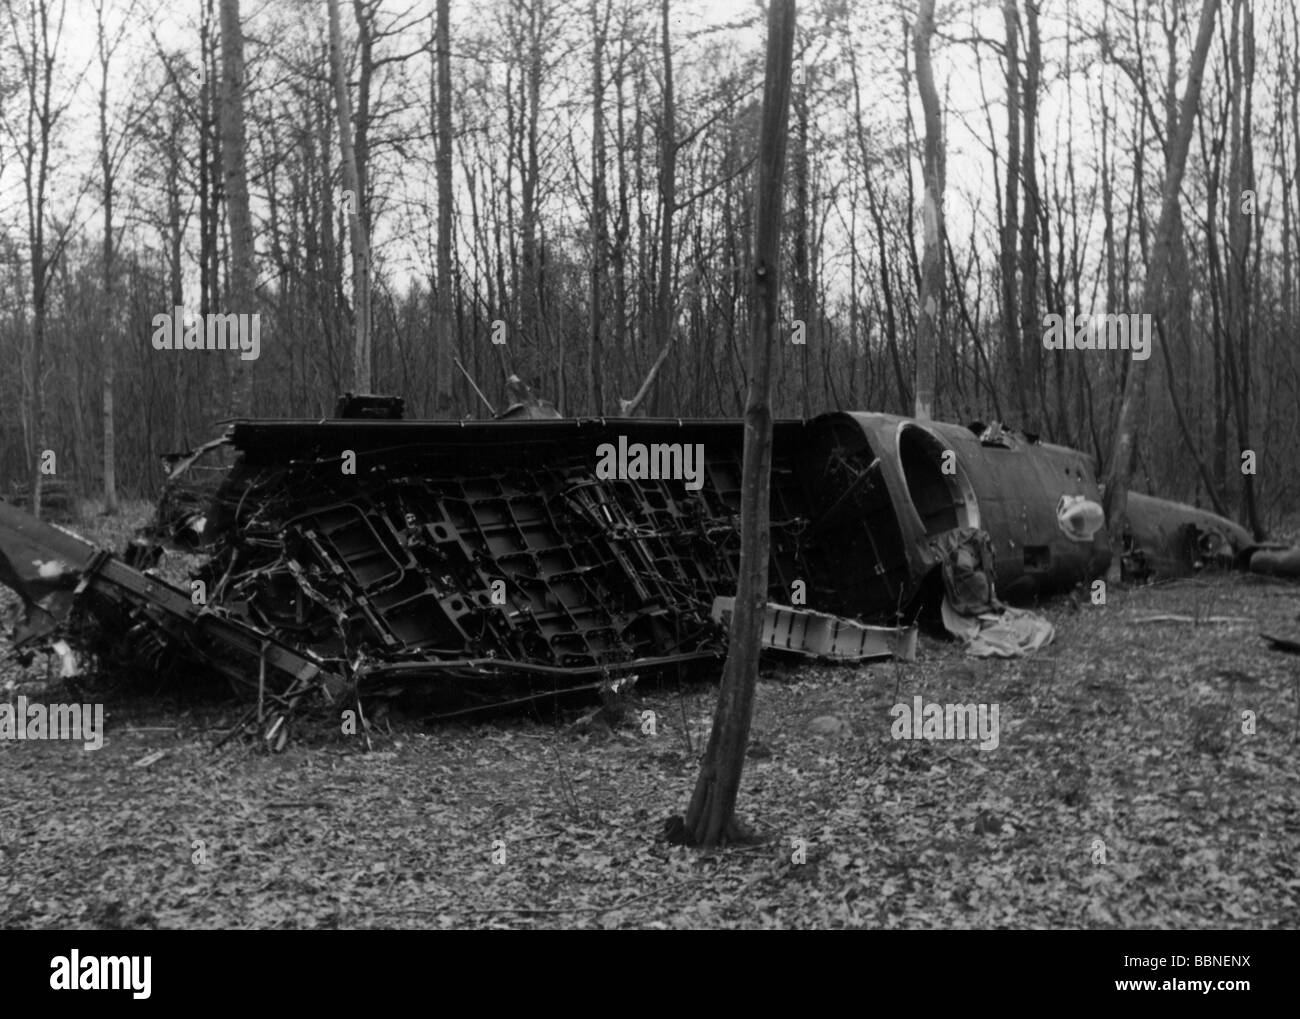 events, Second World War / WWII, aerial warfare, aircraft, crashed / damaged, wreckage of a heavy British bomber Handley Page 'Halifax', shot down by a German night fighter near Compiegne, France, on 9.4.1943, Stock Photo